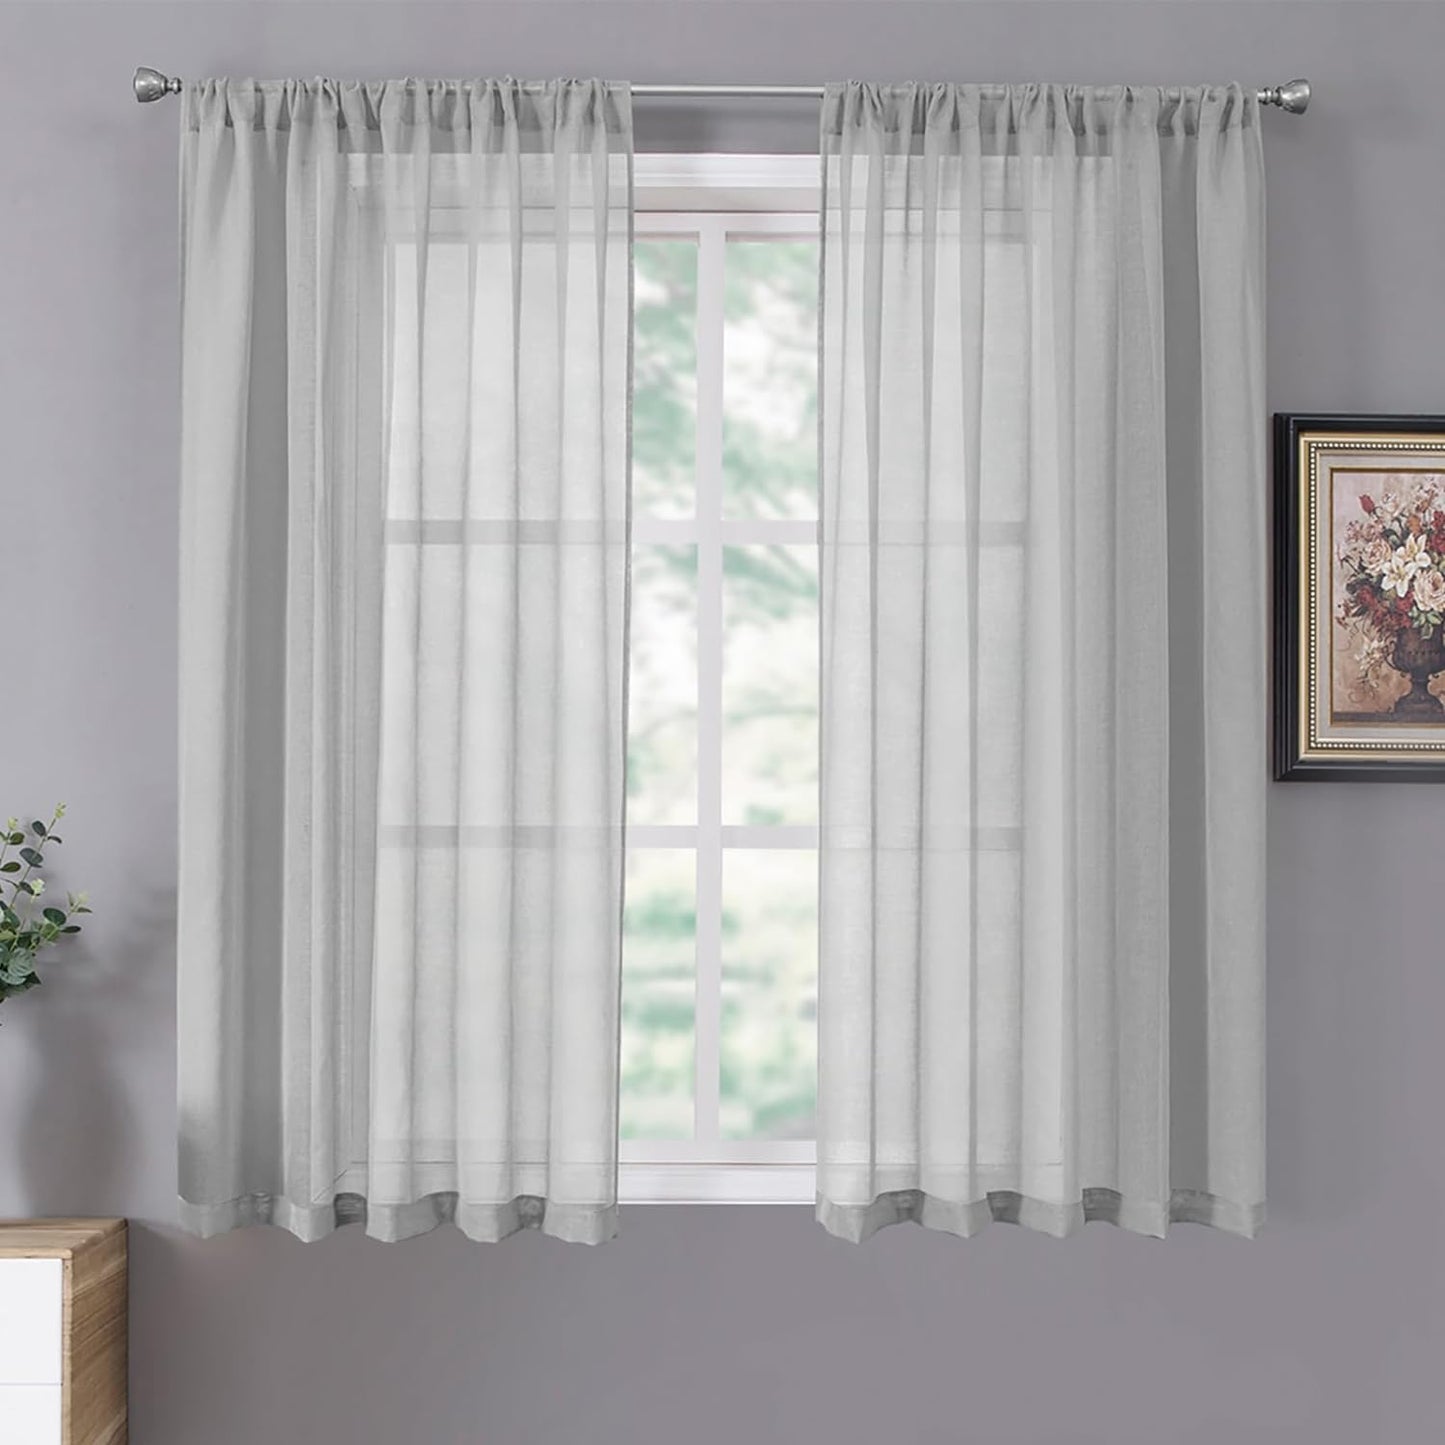 Tollpiz Short Sheer Curtains Linen Textured Bedroom Curtain Sheers Light Filtering Rod Pocket Voile Curtains for Living Room, 54 X 45 Inches Long, White, Set of 2 Panels  Tollpiz Tex Silver Grey 54"W X 54"L 